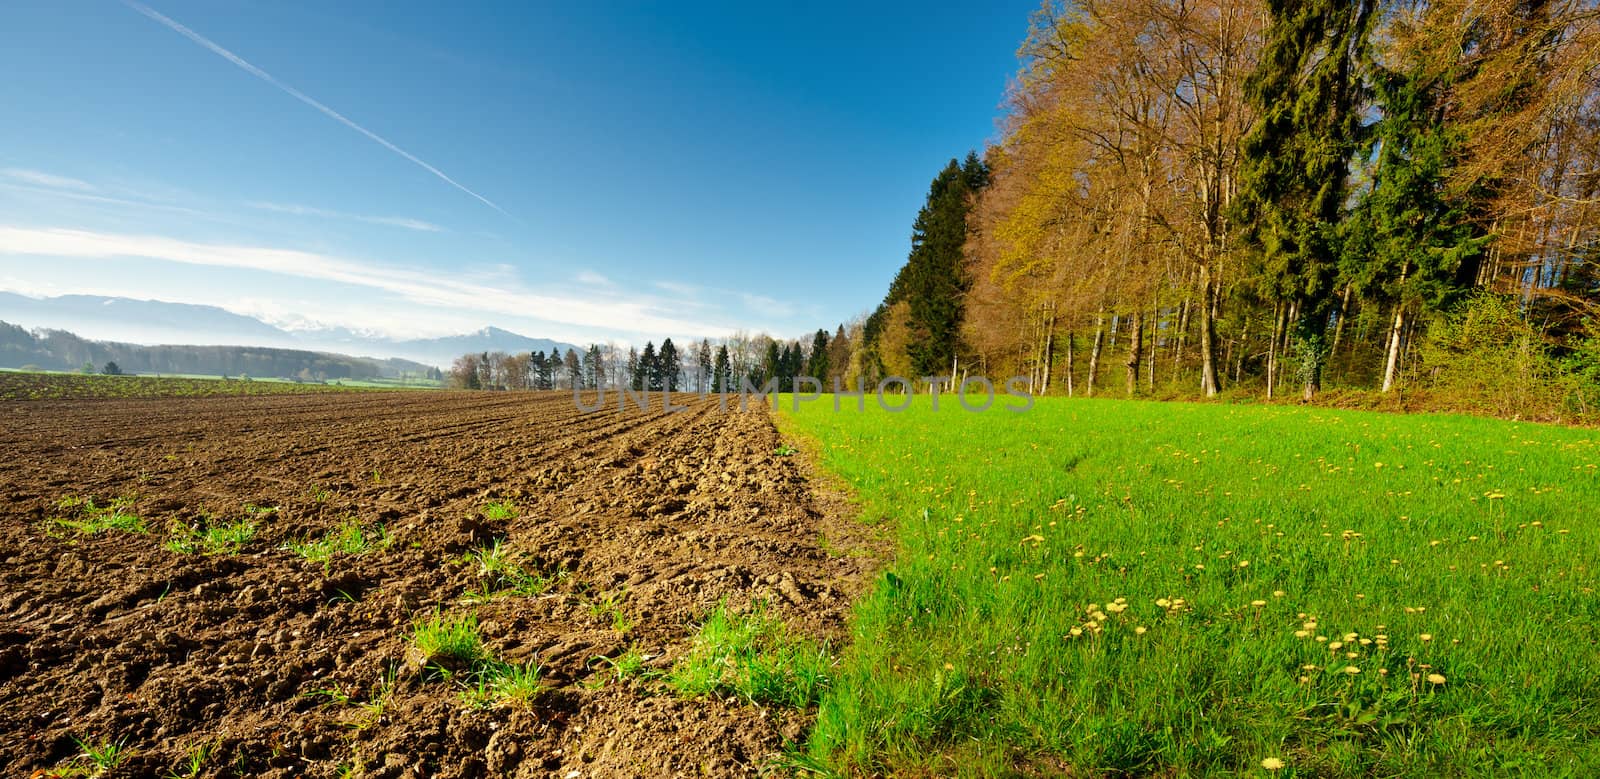 Ploughed Field near the Forest, Swiss Alps